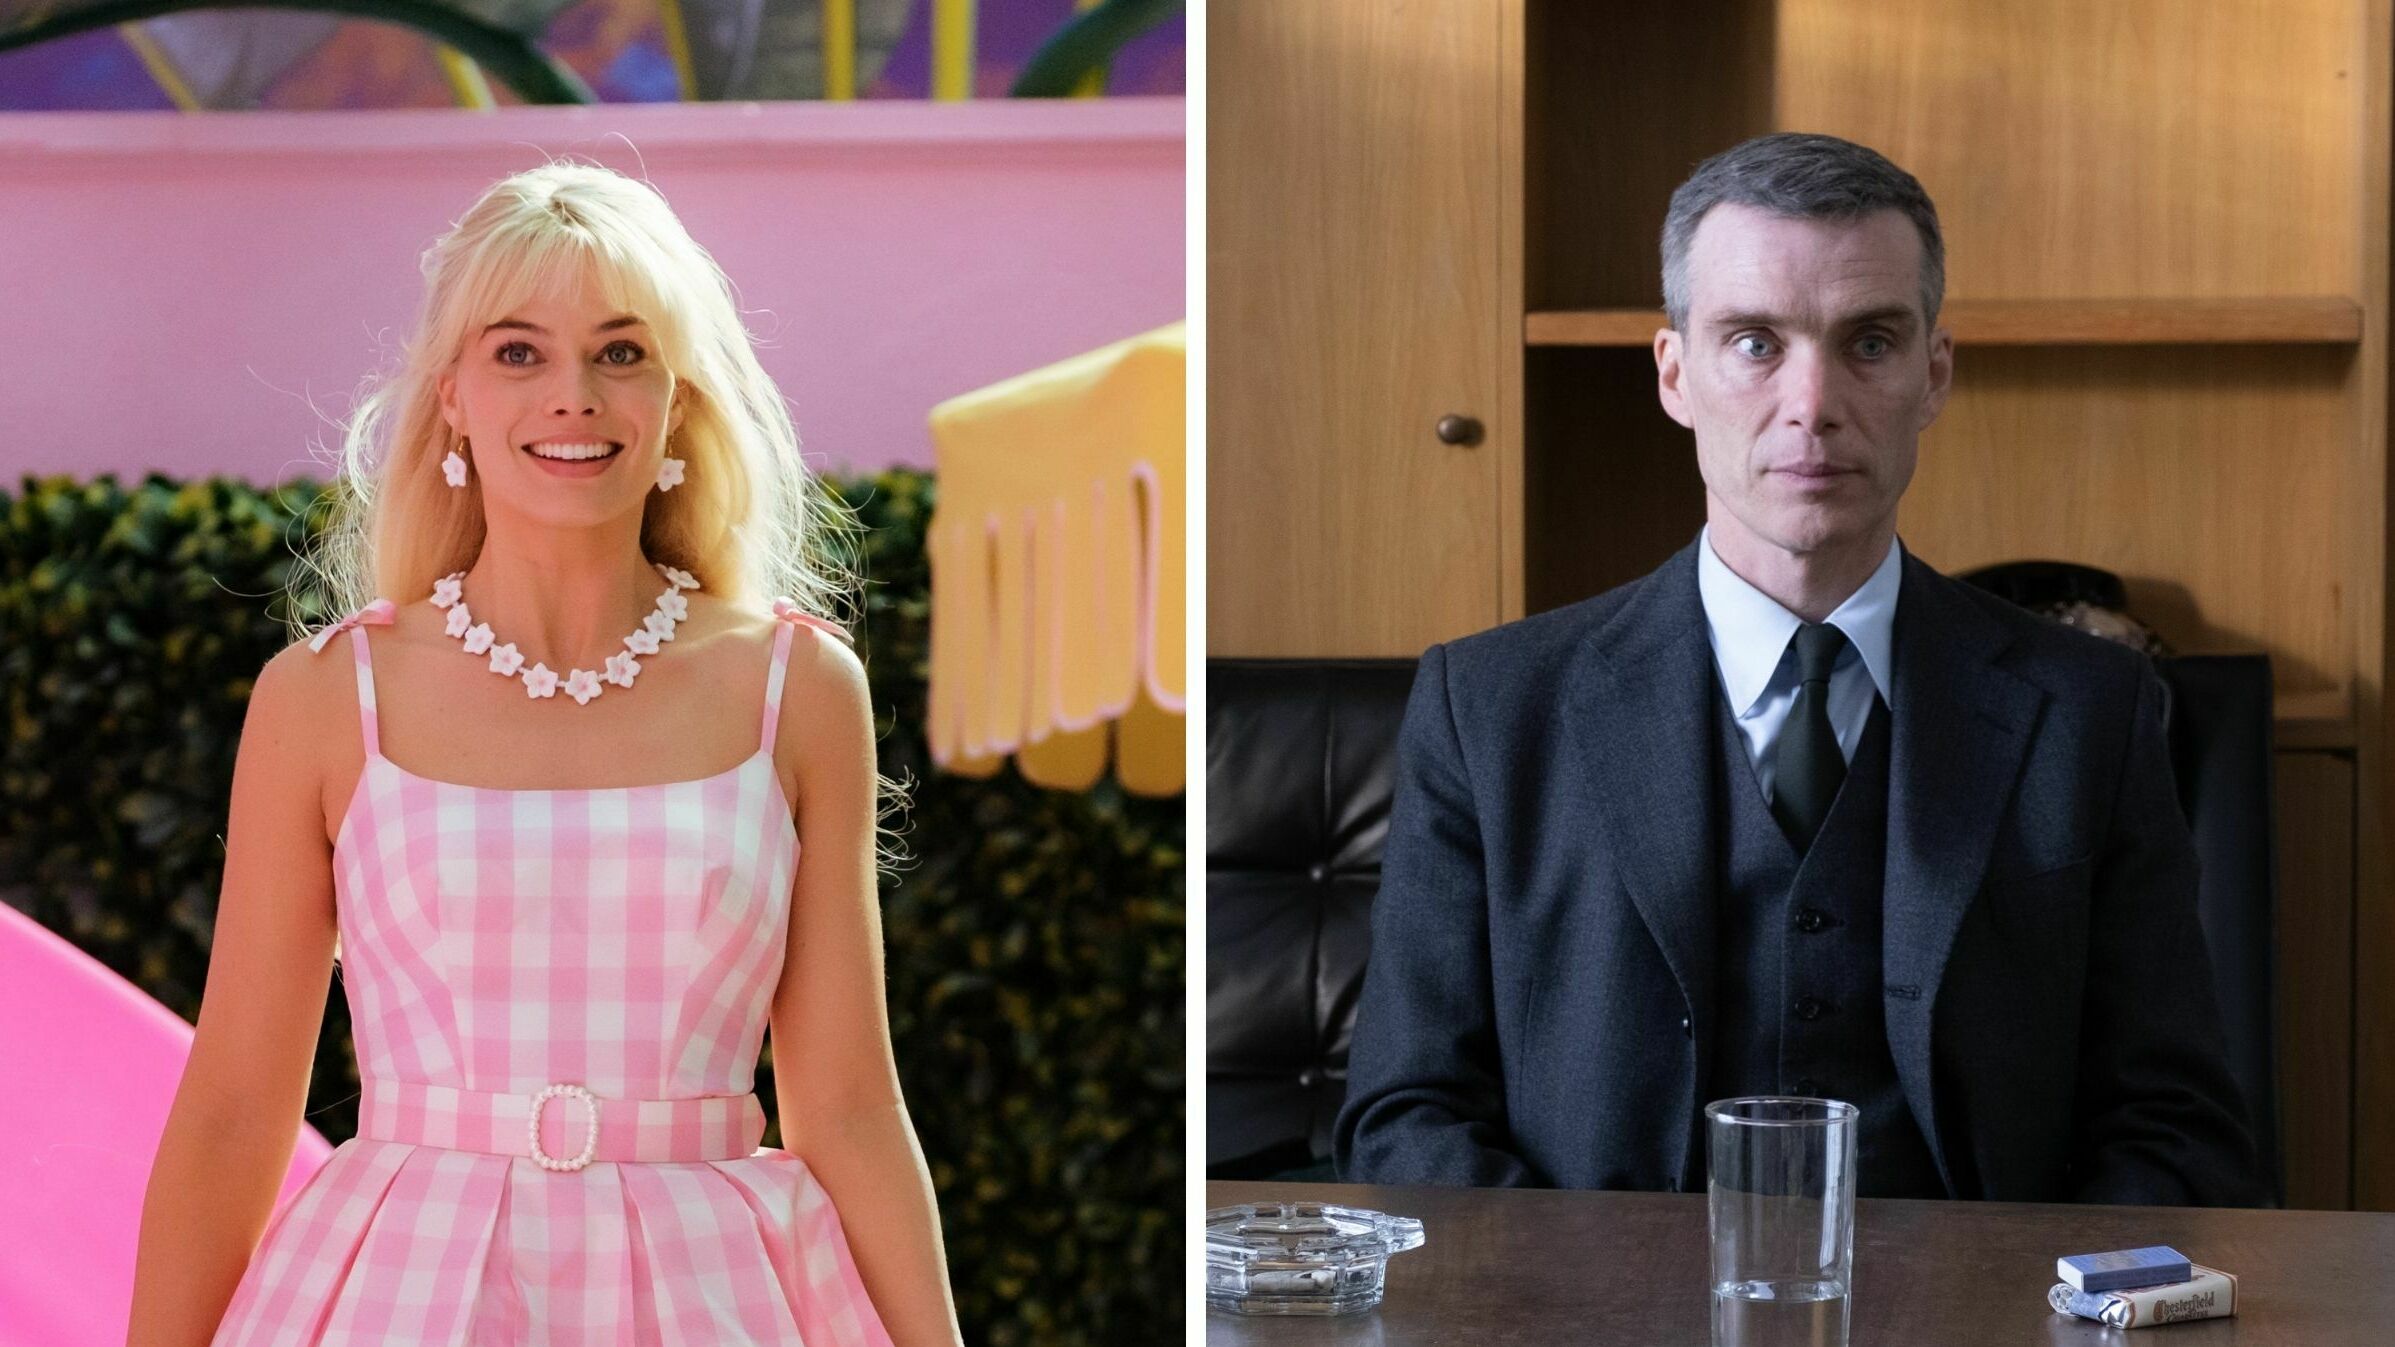 Two images side by side. One of a smiling blonde white woman in a pink dress, the other of a serious man sitting squarely at a brown desk.